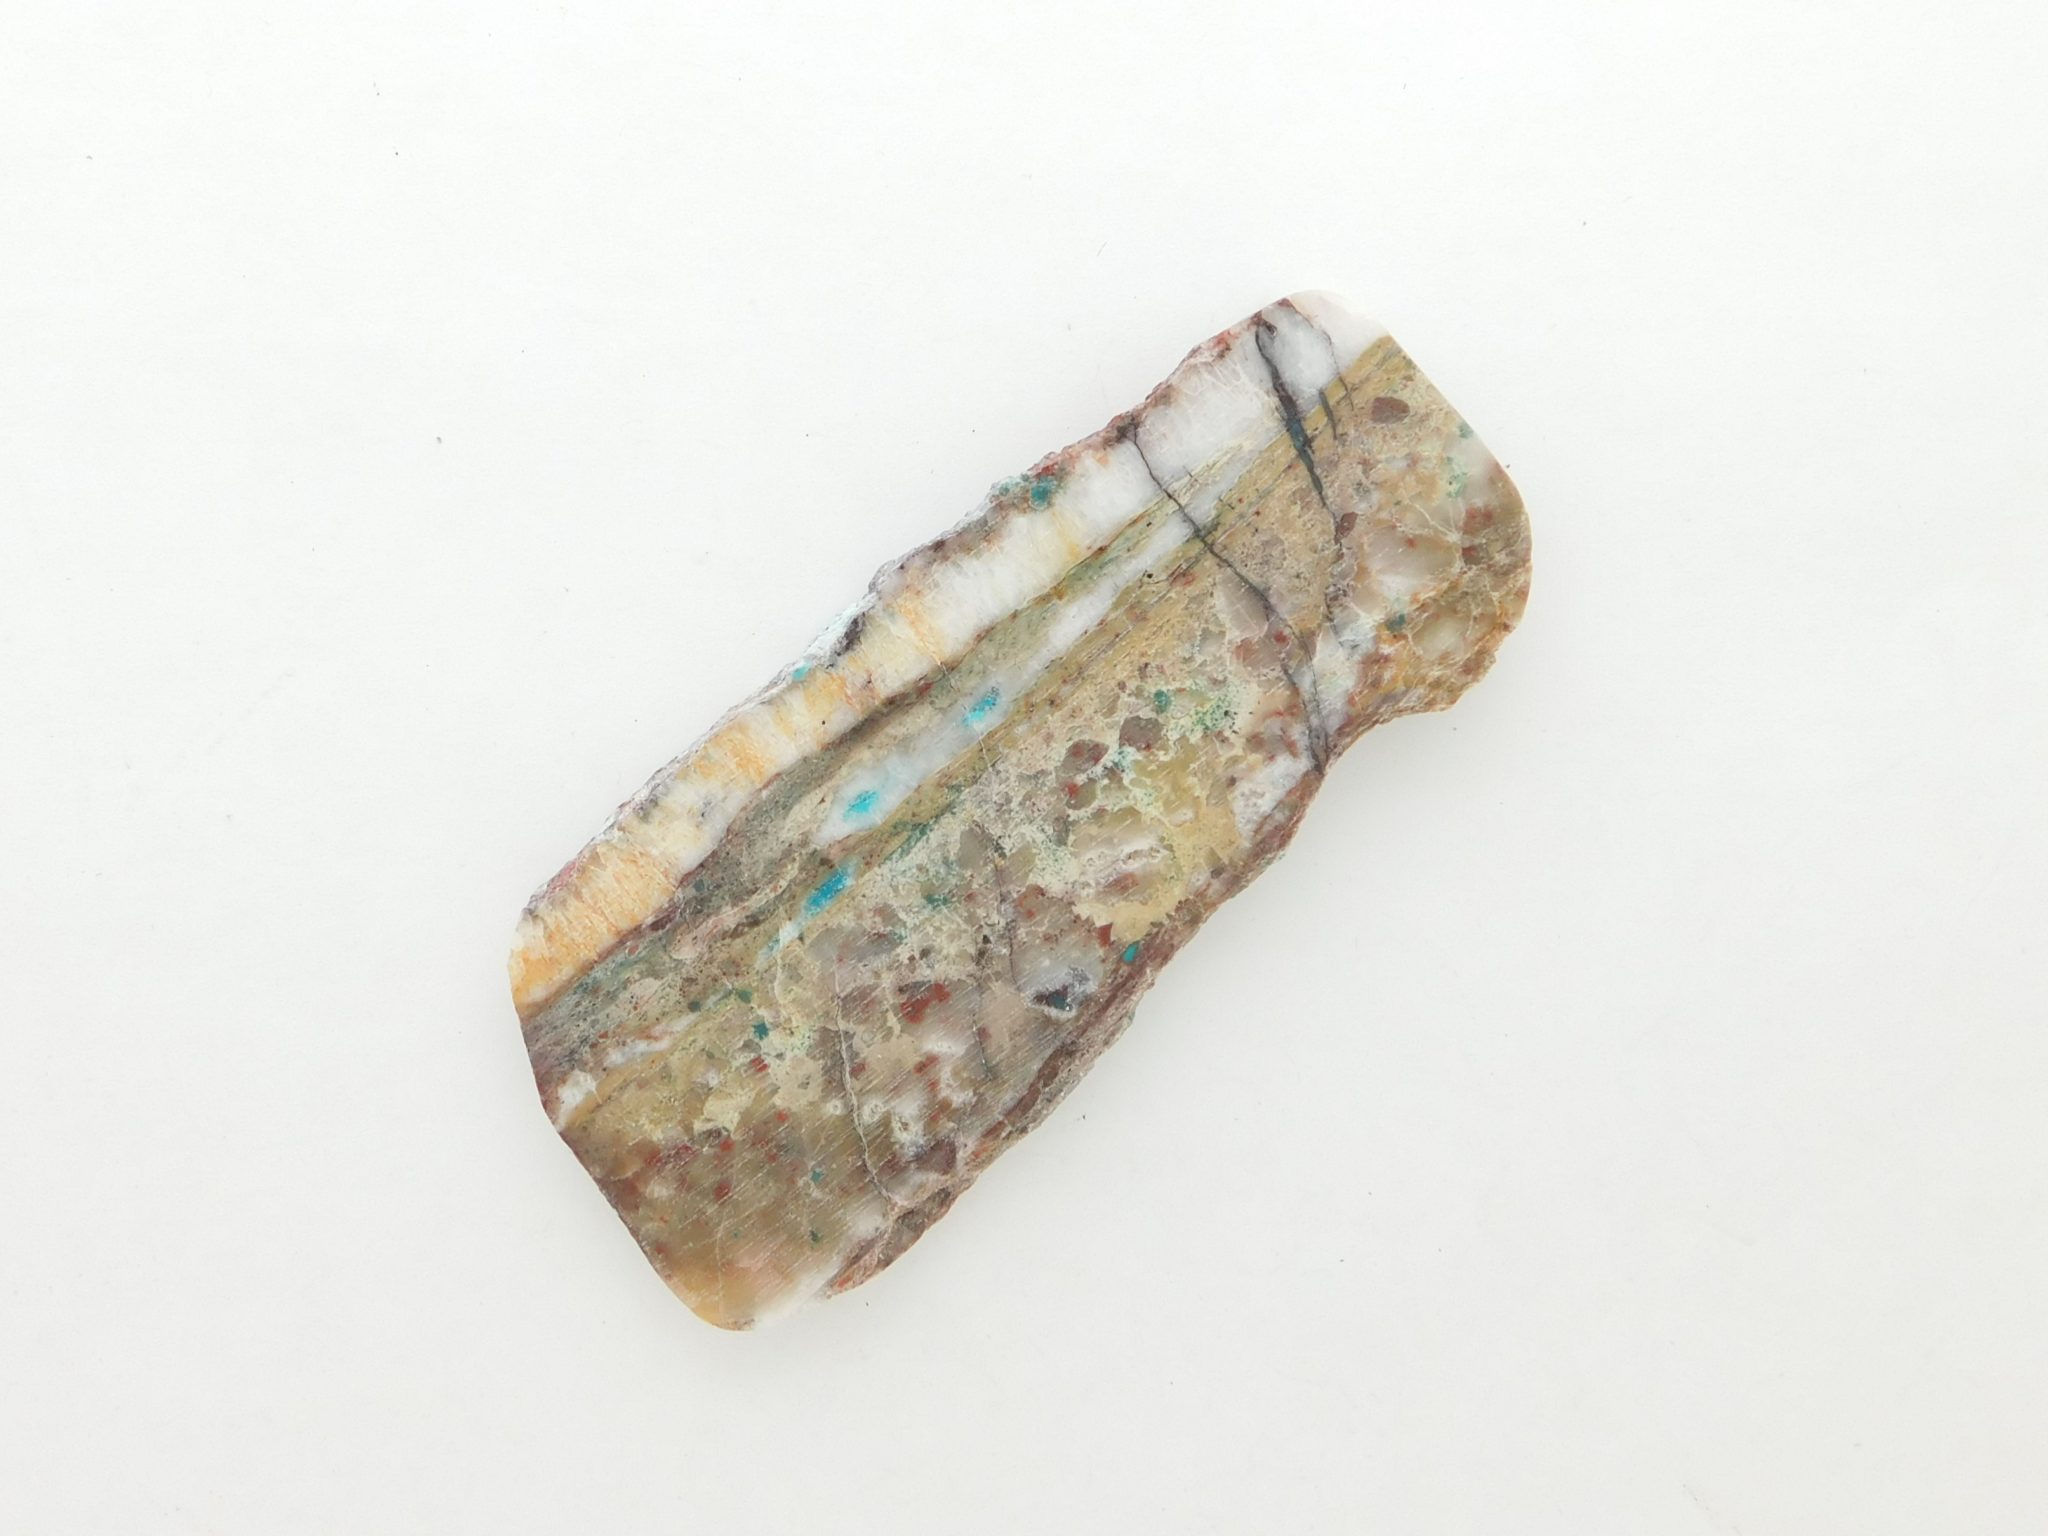 Rear view of Rear view of Bisbee Turquoise Slab 72.1 Grams